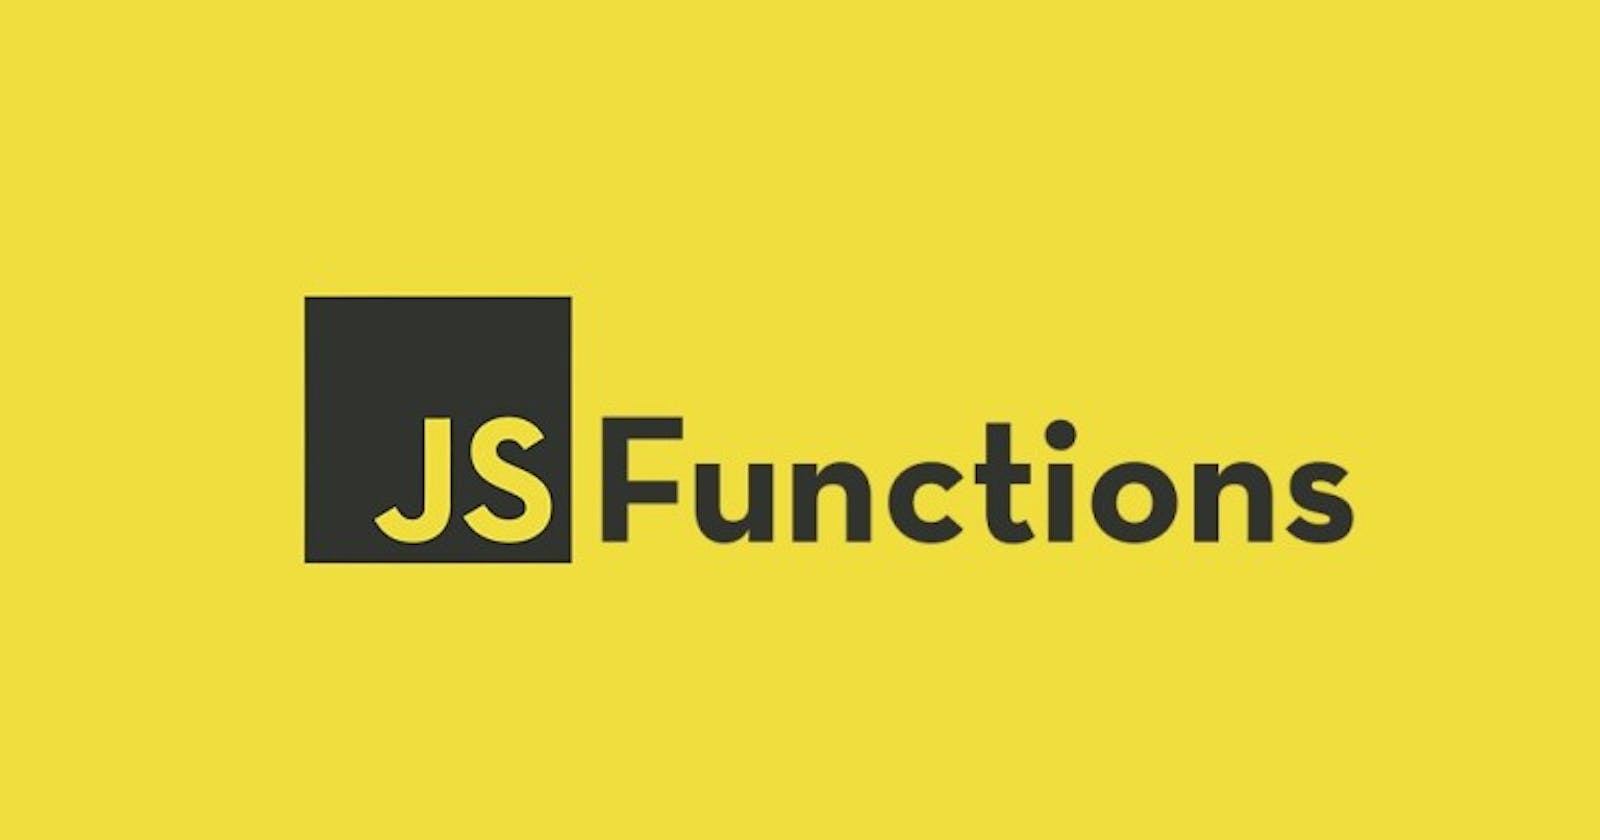 Dealing with Functions in JavaScript.